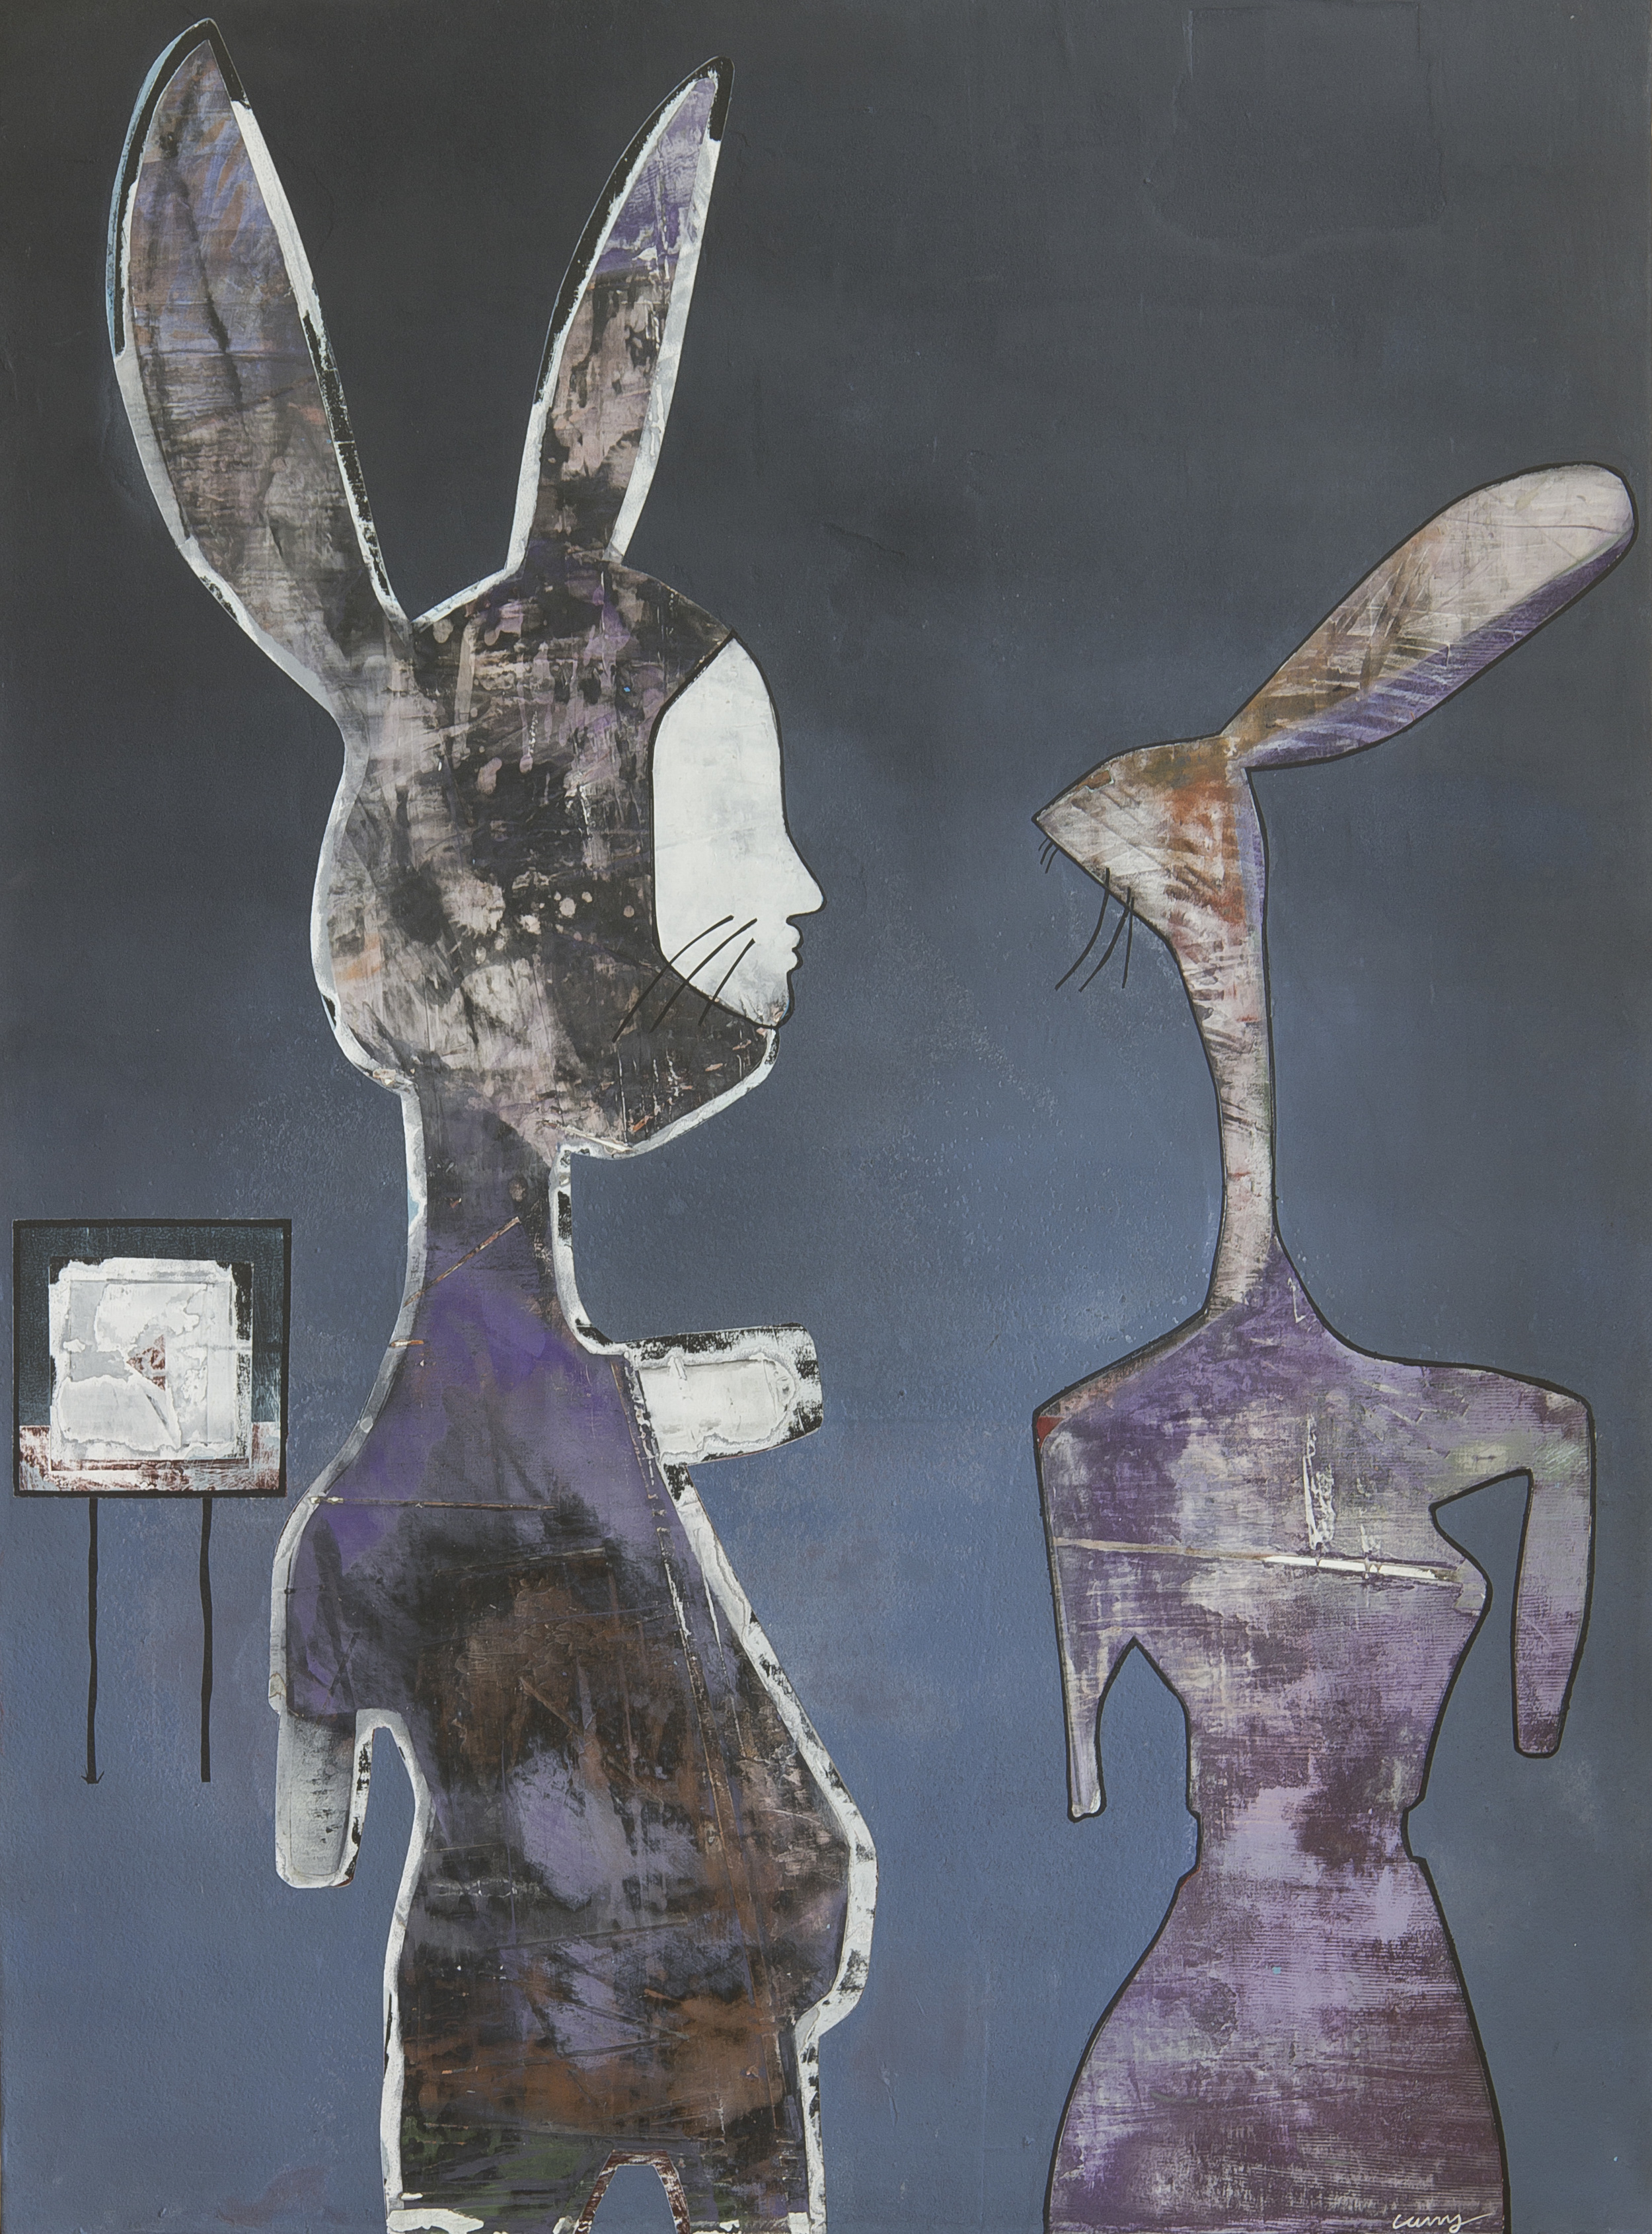  Misleading Rabbit acrylic on canvas 46 x 34 inches 2012  unavailable   